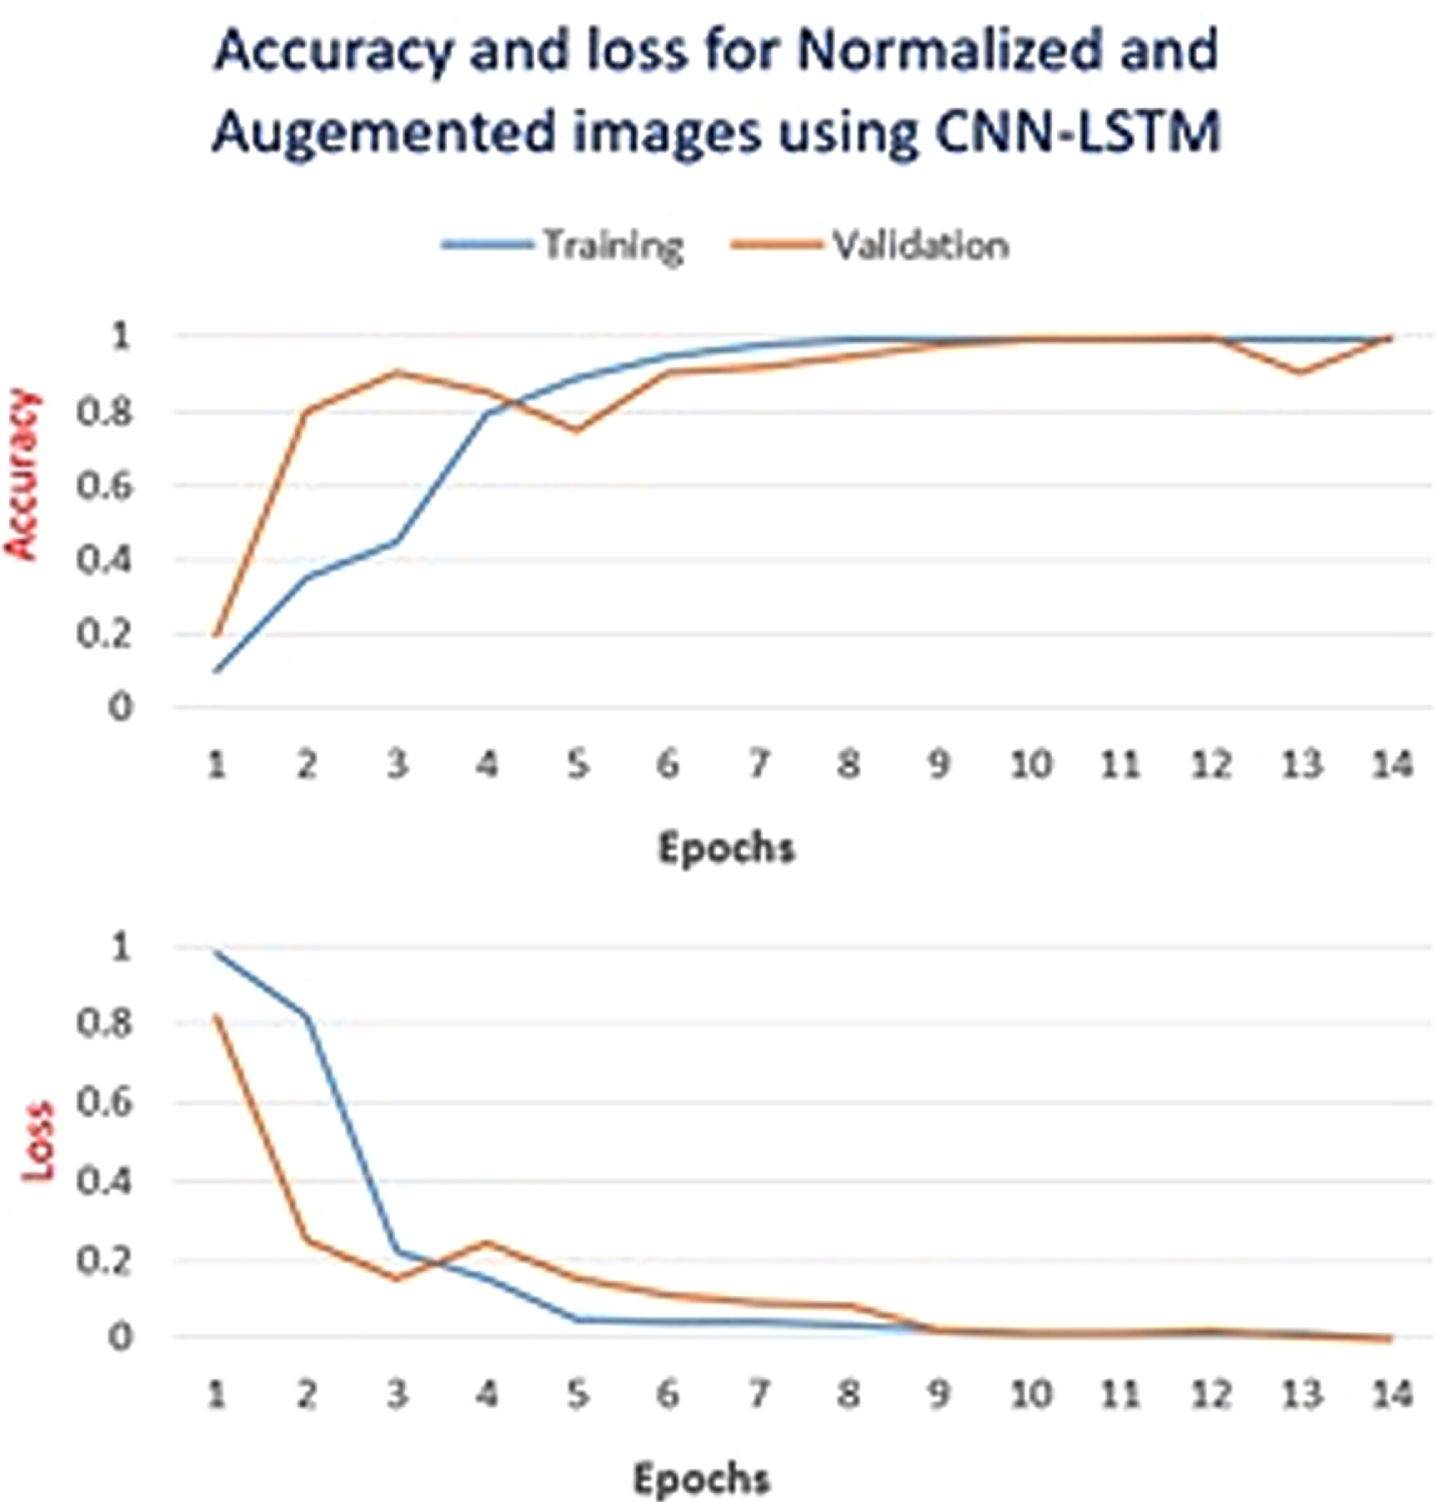 CNN-LSTM Model: Graphs of training accuracy and loss for pre-processed augmented images